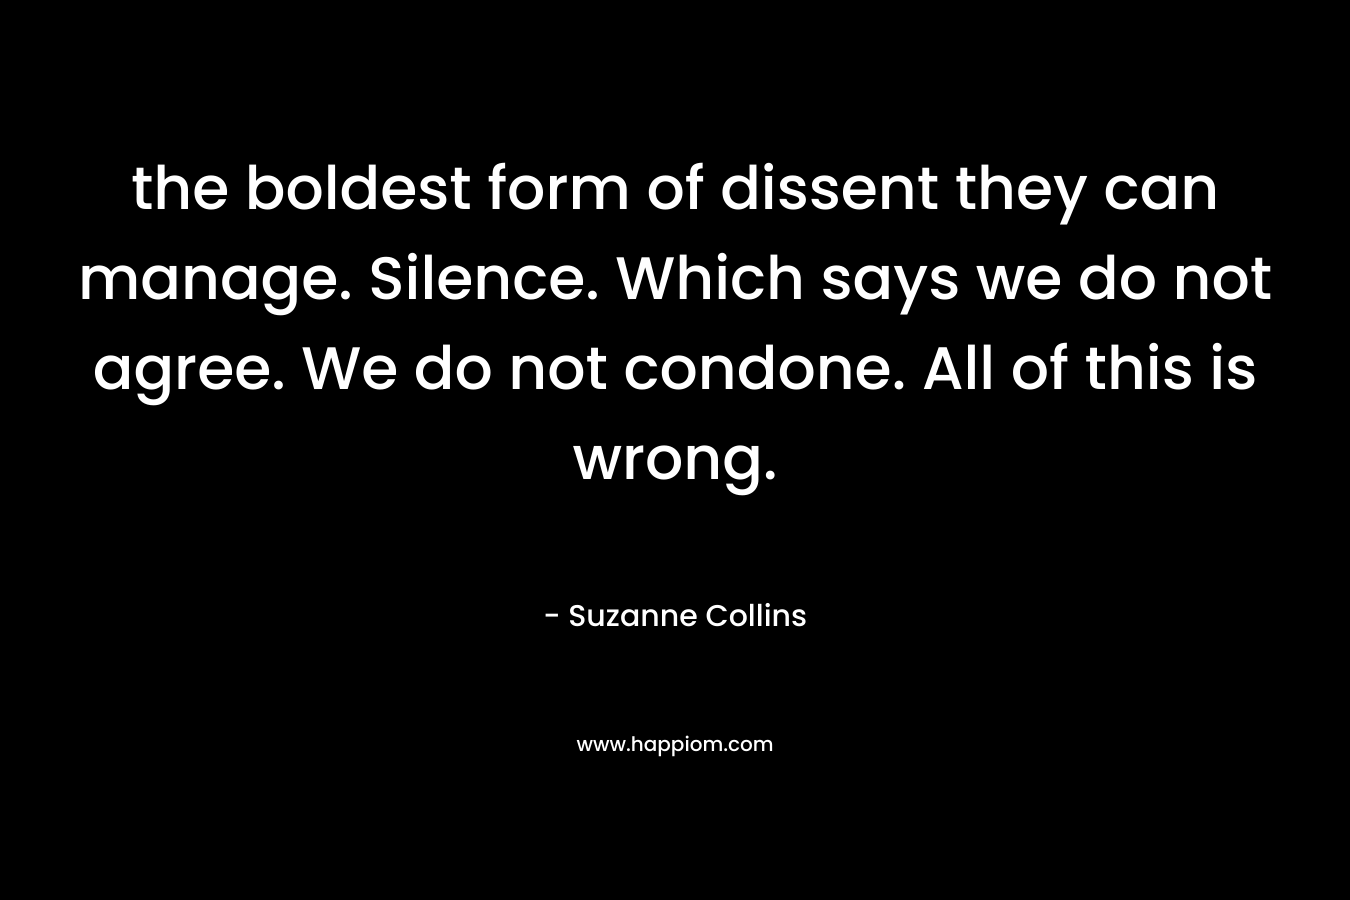 the boldest form of dissent they can manage. Silence. Which says we do not agree. We do not condone. All of this is wrong. – Suzanne Collins